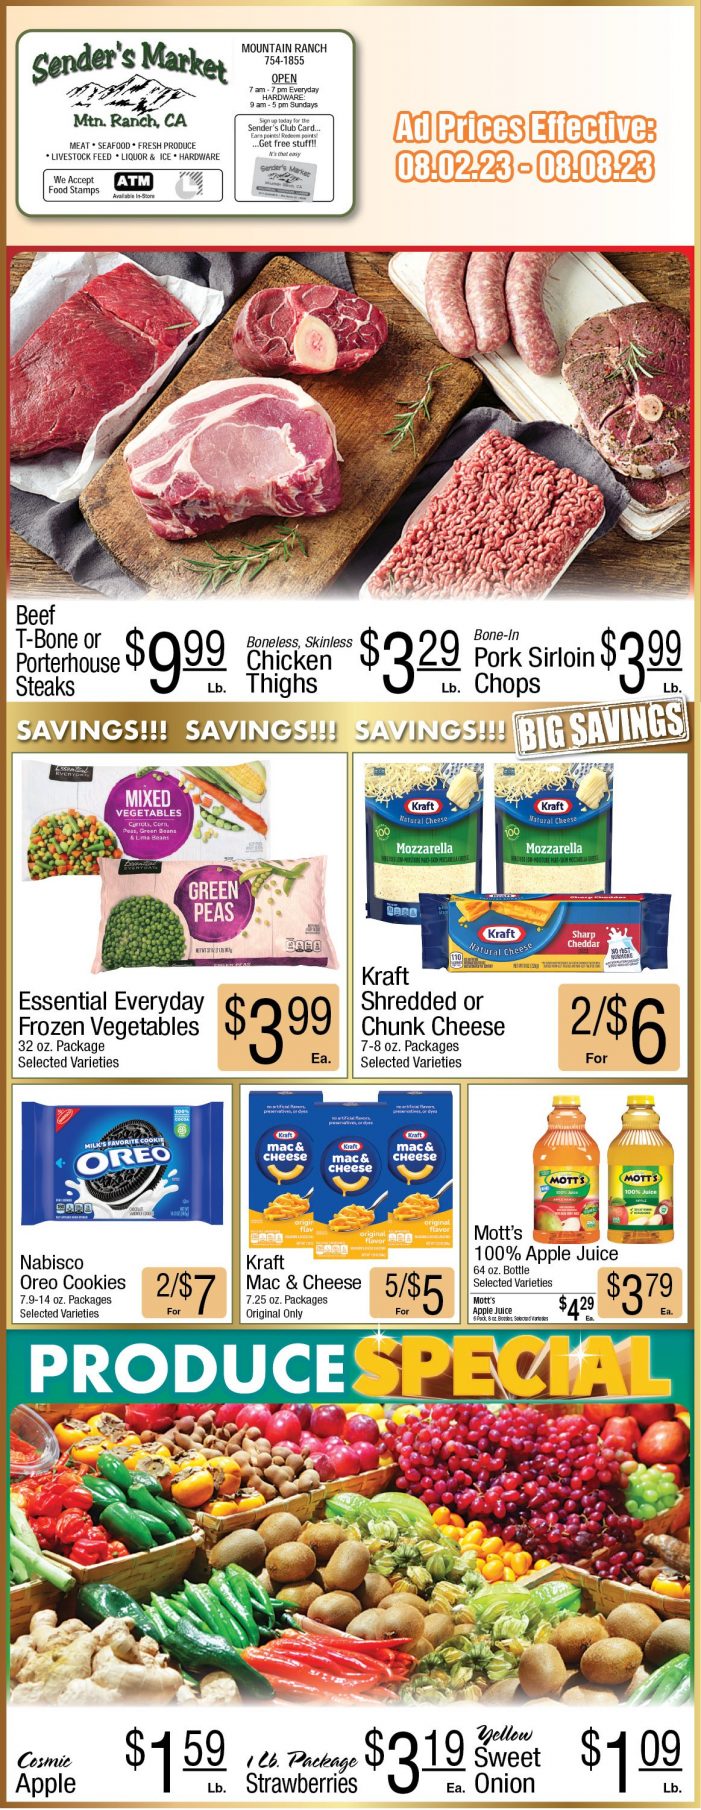 Sender’s Market Weekly Ad & Grocery Specials Through August 8th! Shop Local & Save!!